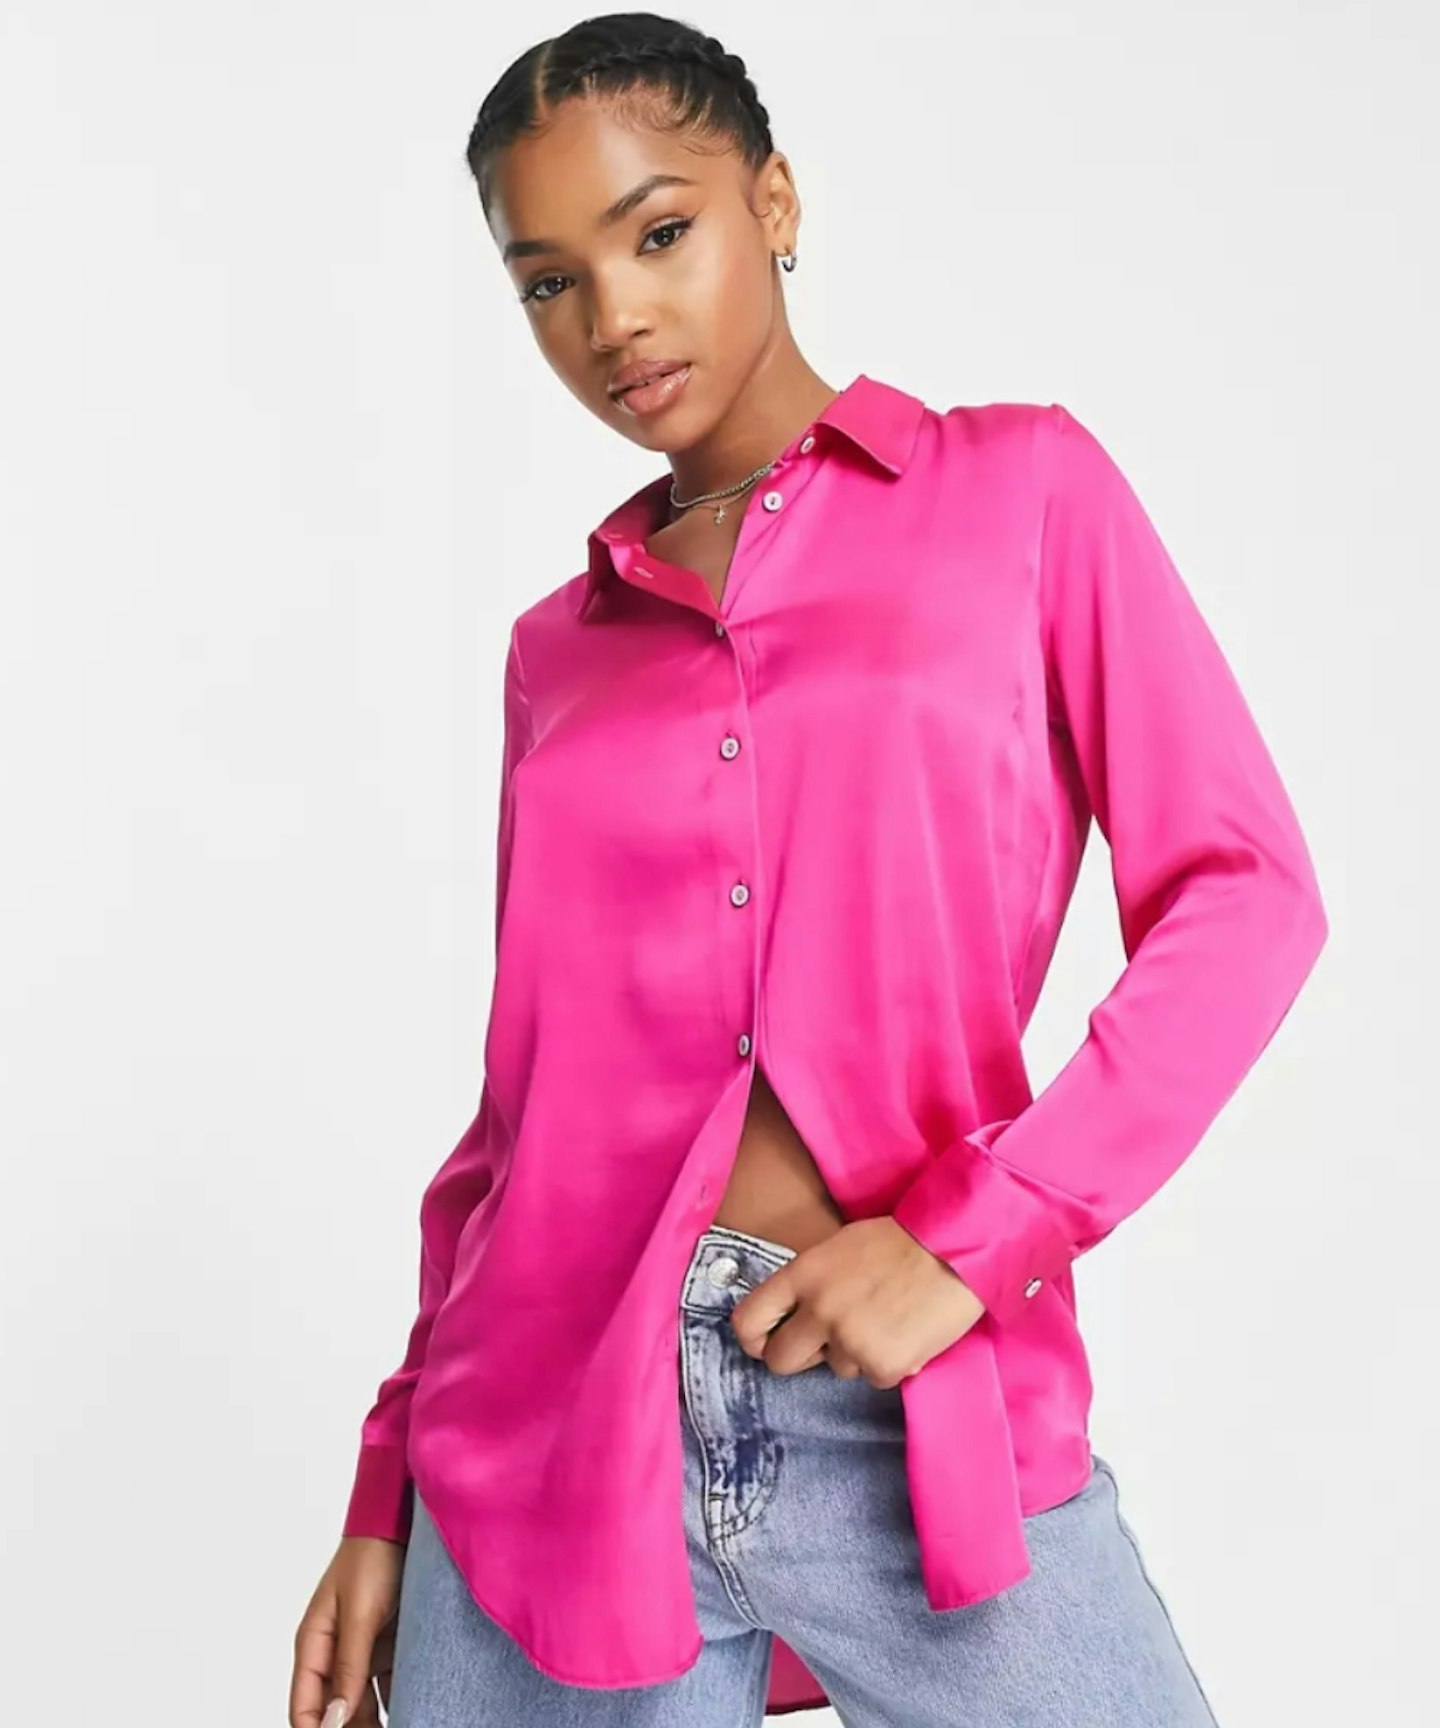  New Look Satin Shirt in Bright Pink